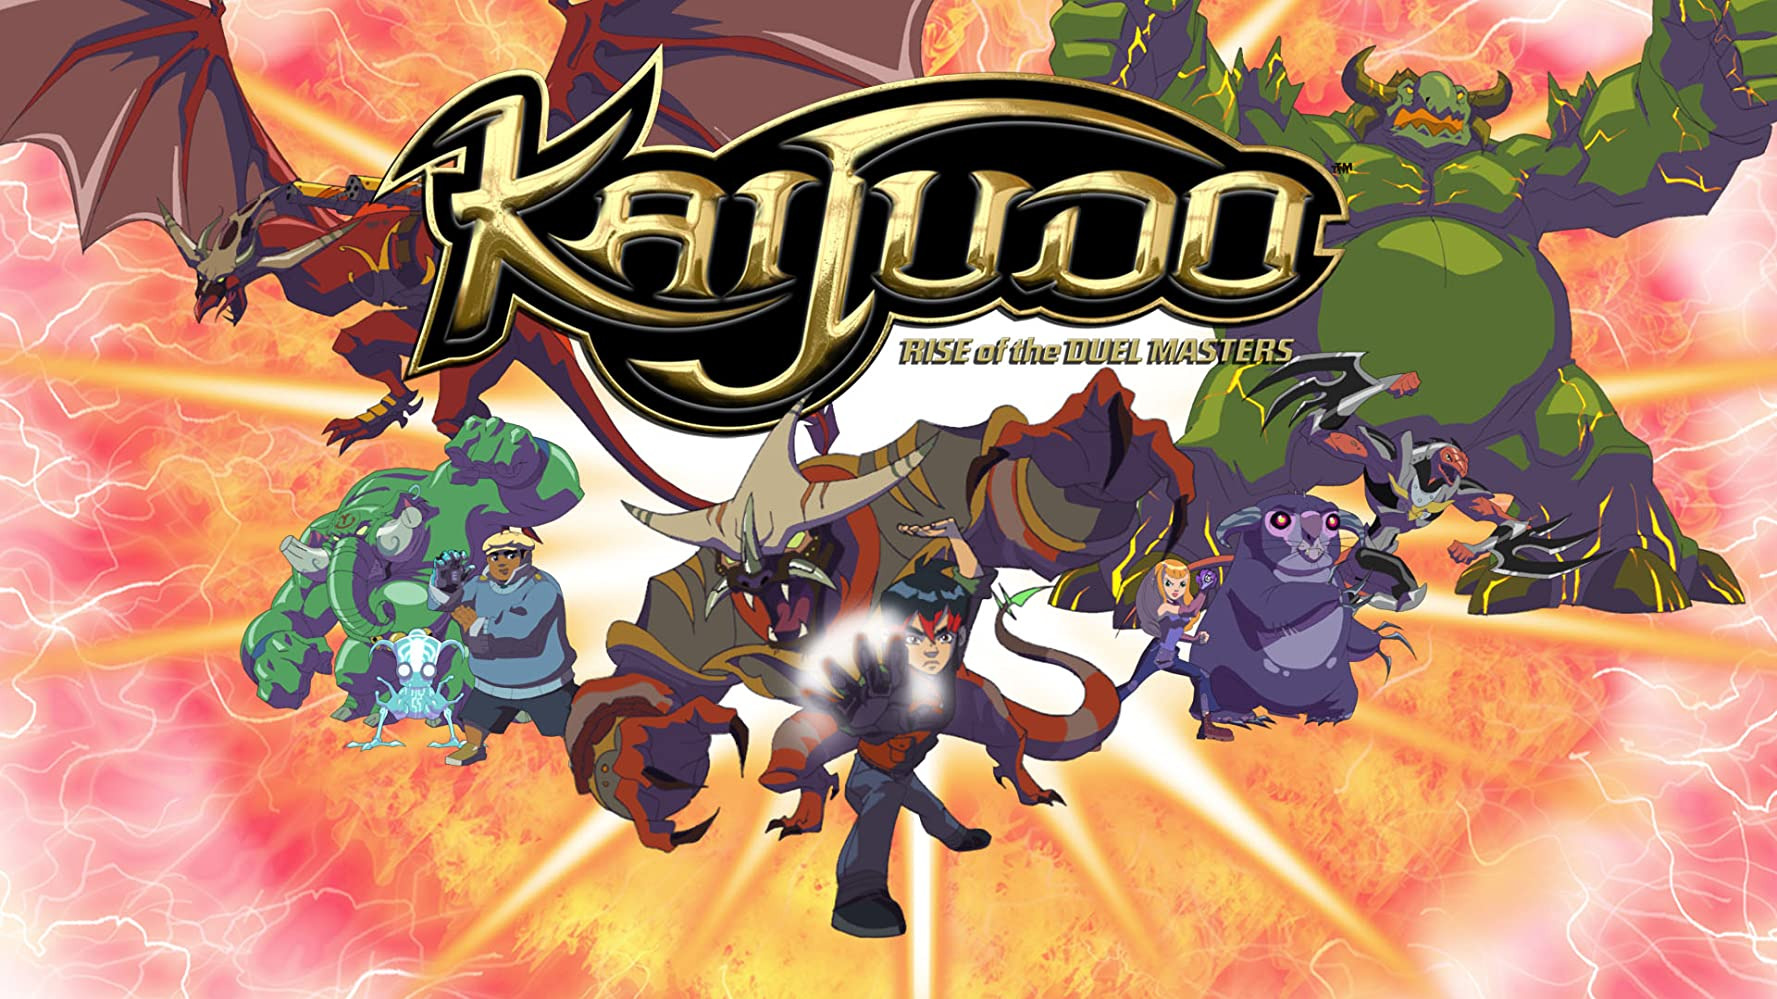 Аниме Kaijudo: Rise of the Duel Masters